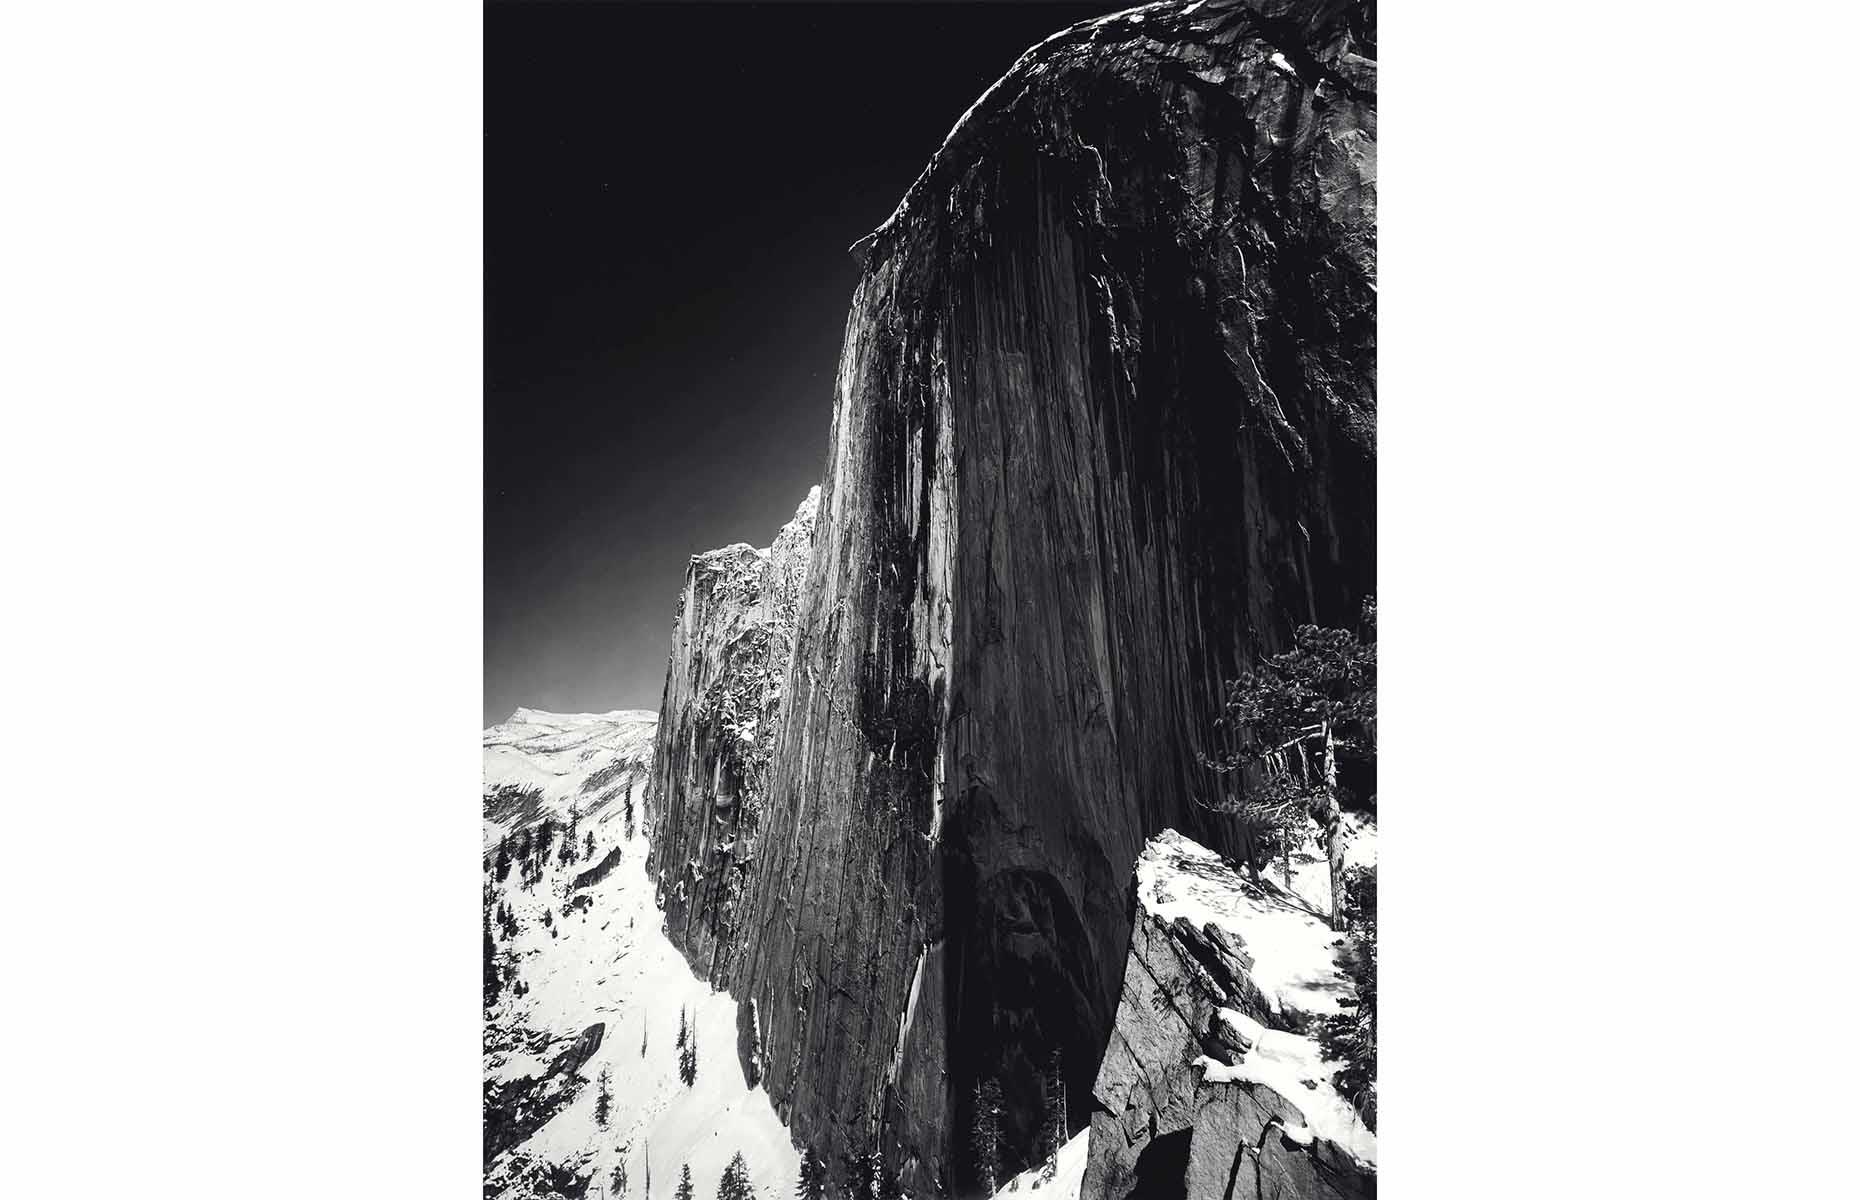 <p>The beauty of Yosemite has captured the imagination of countless creatives down the decades. One of the most notable was the landscape photographer Ansel Adams (1902-1984), who dedicated years of his life to documenting the park. His monochrome images of Yosemite – especially this one, <em>Monolith, the Face of Half Dome</em>, taken in 1927 – brought him immense critical acclaim. The Ansel Adams Gallery in Yosemite Village is still operated by the Adams family.</p>